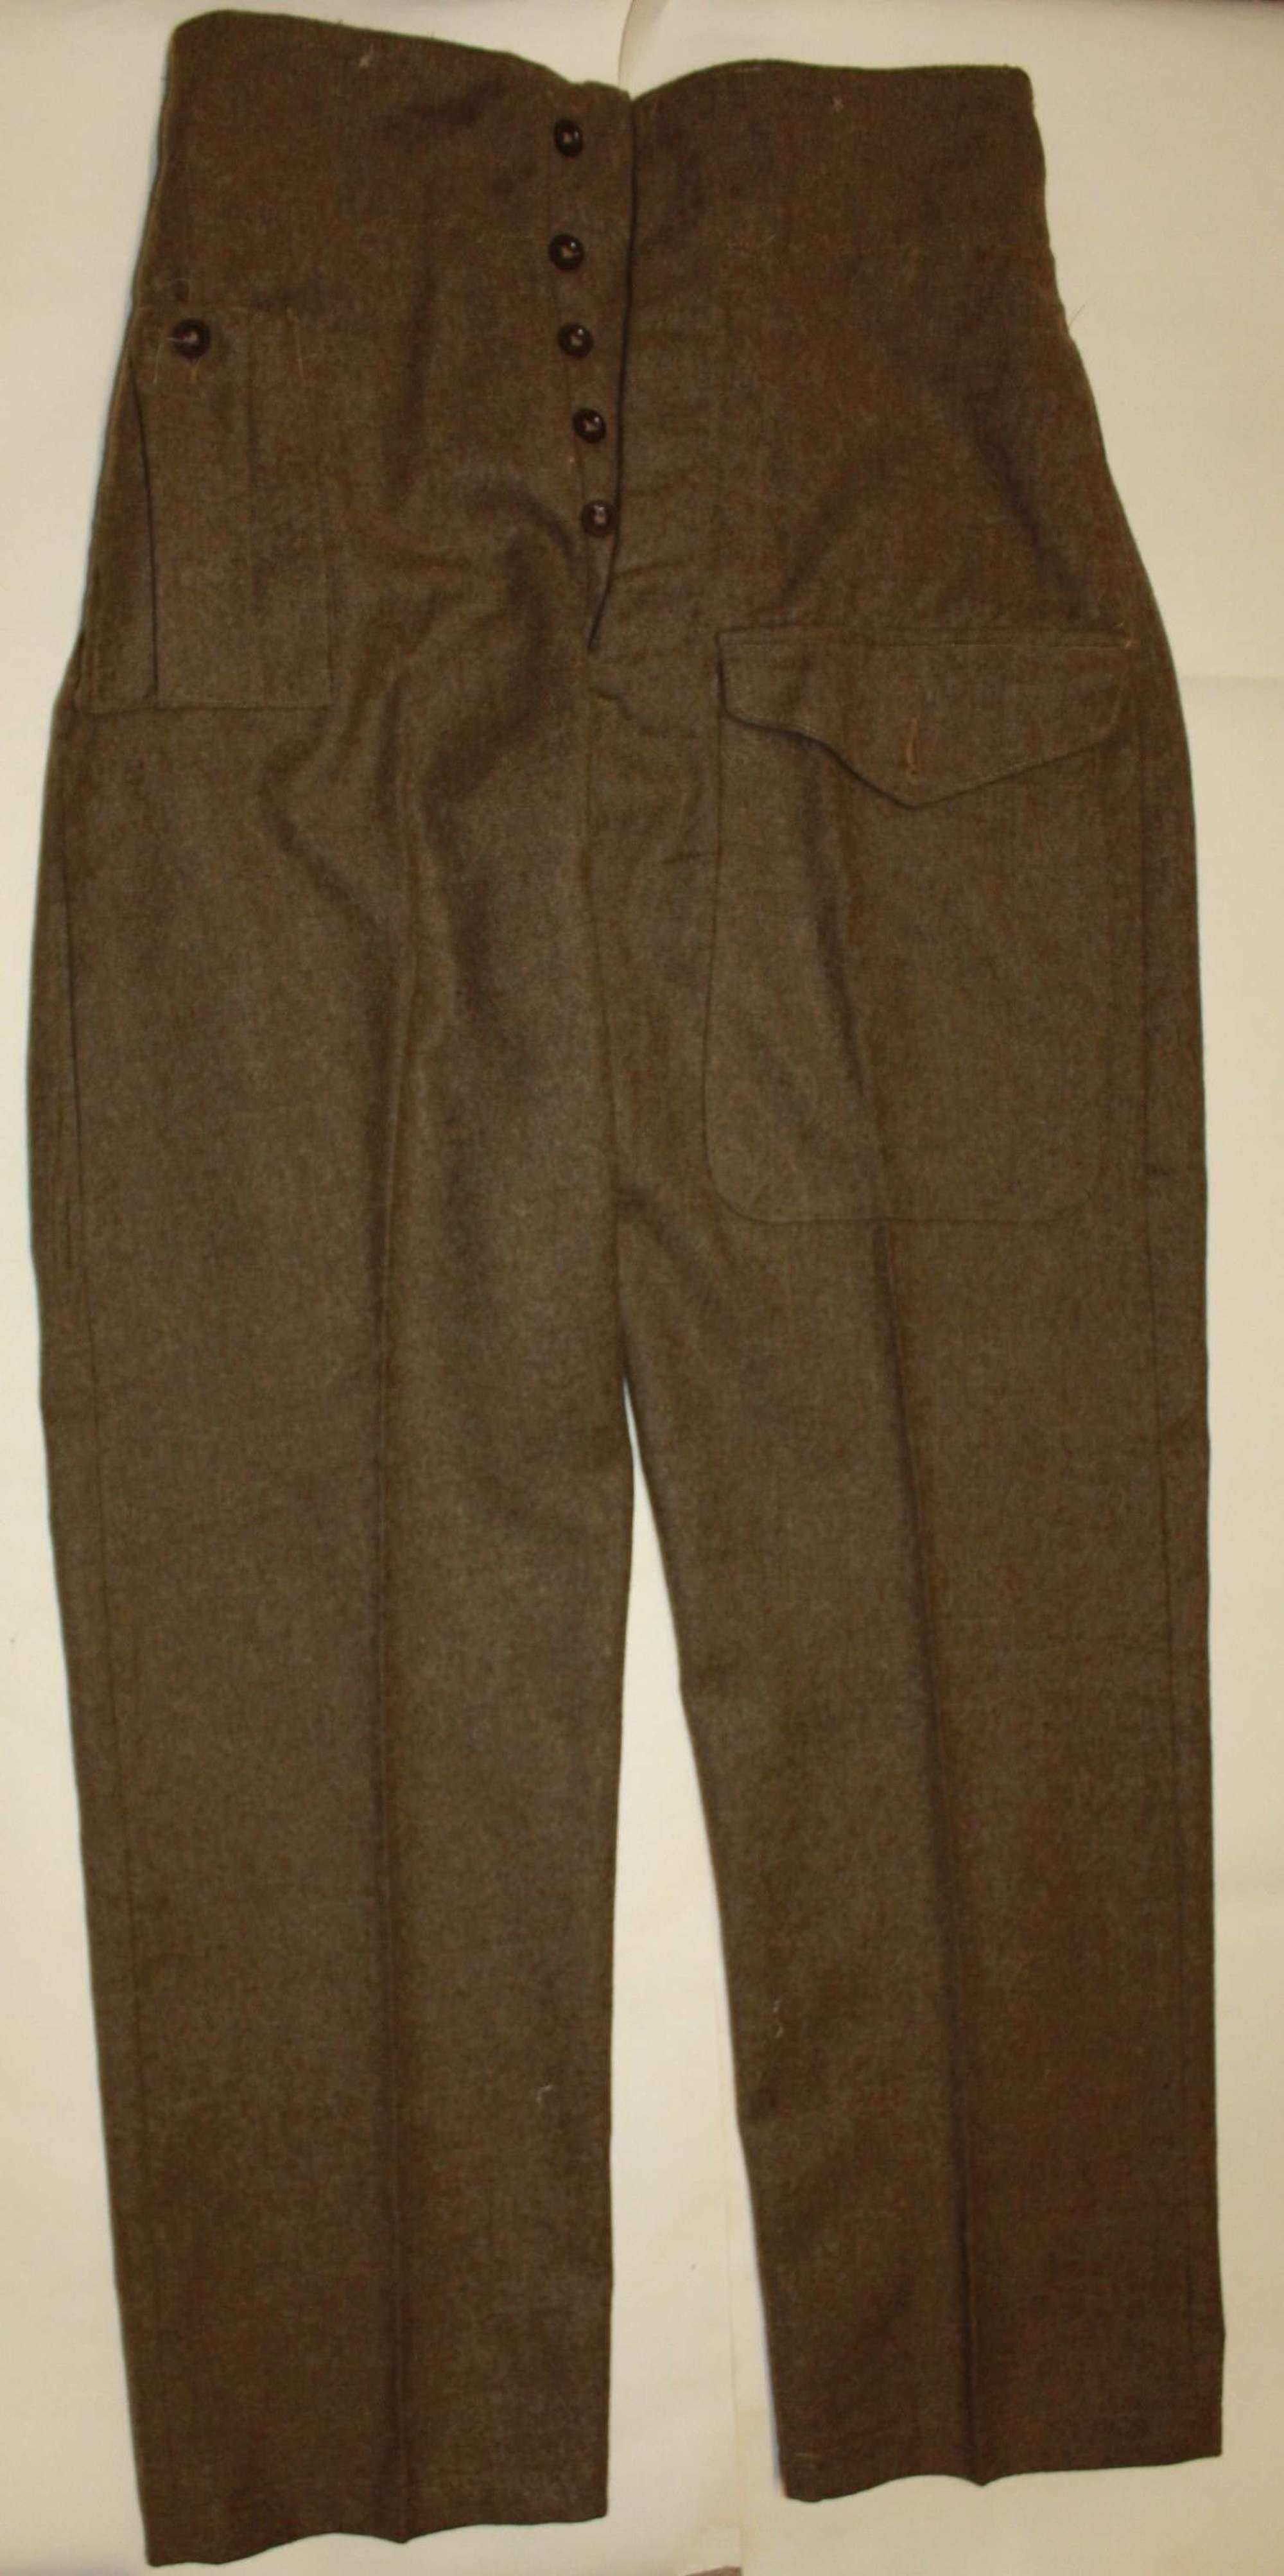 A good pair of labeled  battle dress trouser 1945 dated size 13